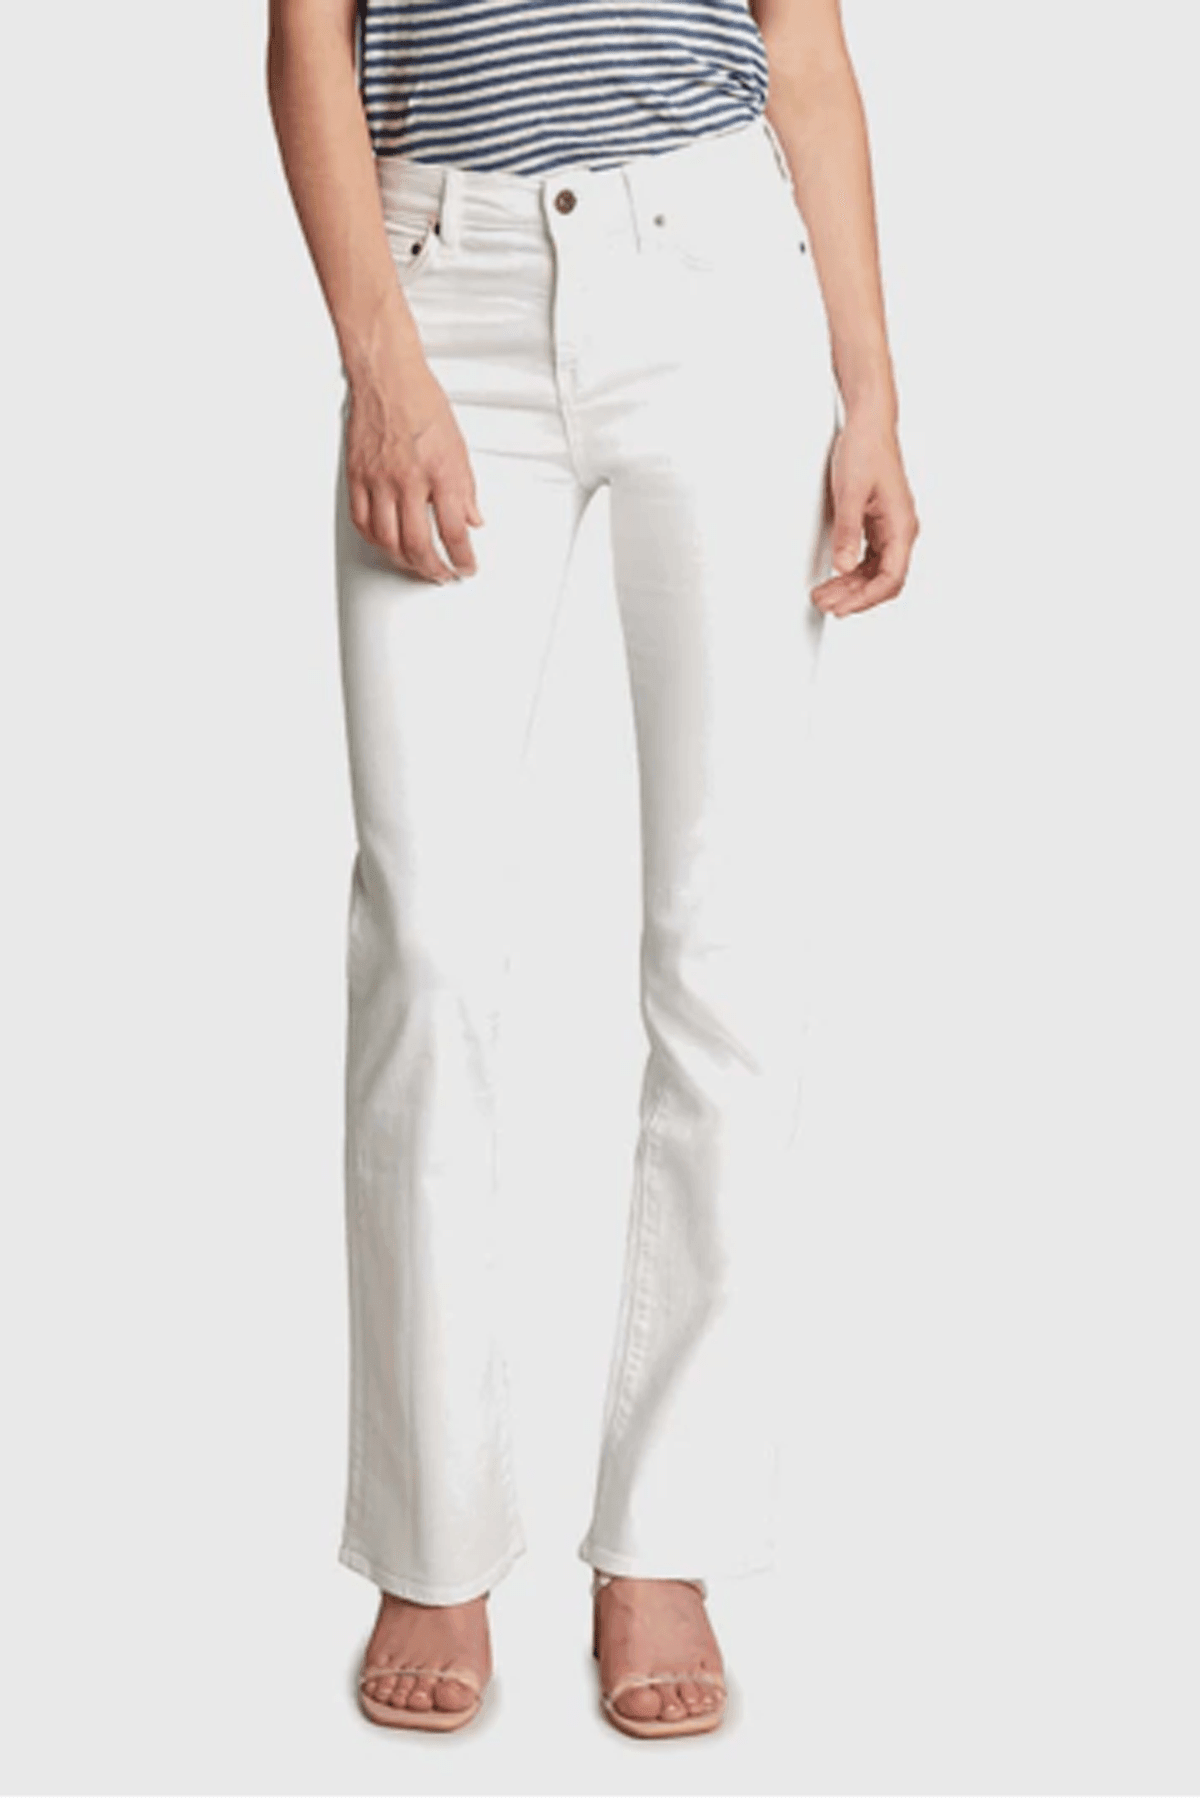 Hi-Rise Boot Style Jean in White by Principle Denim